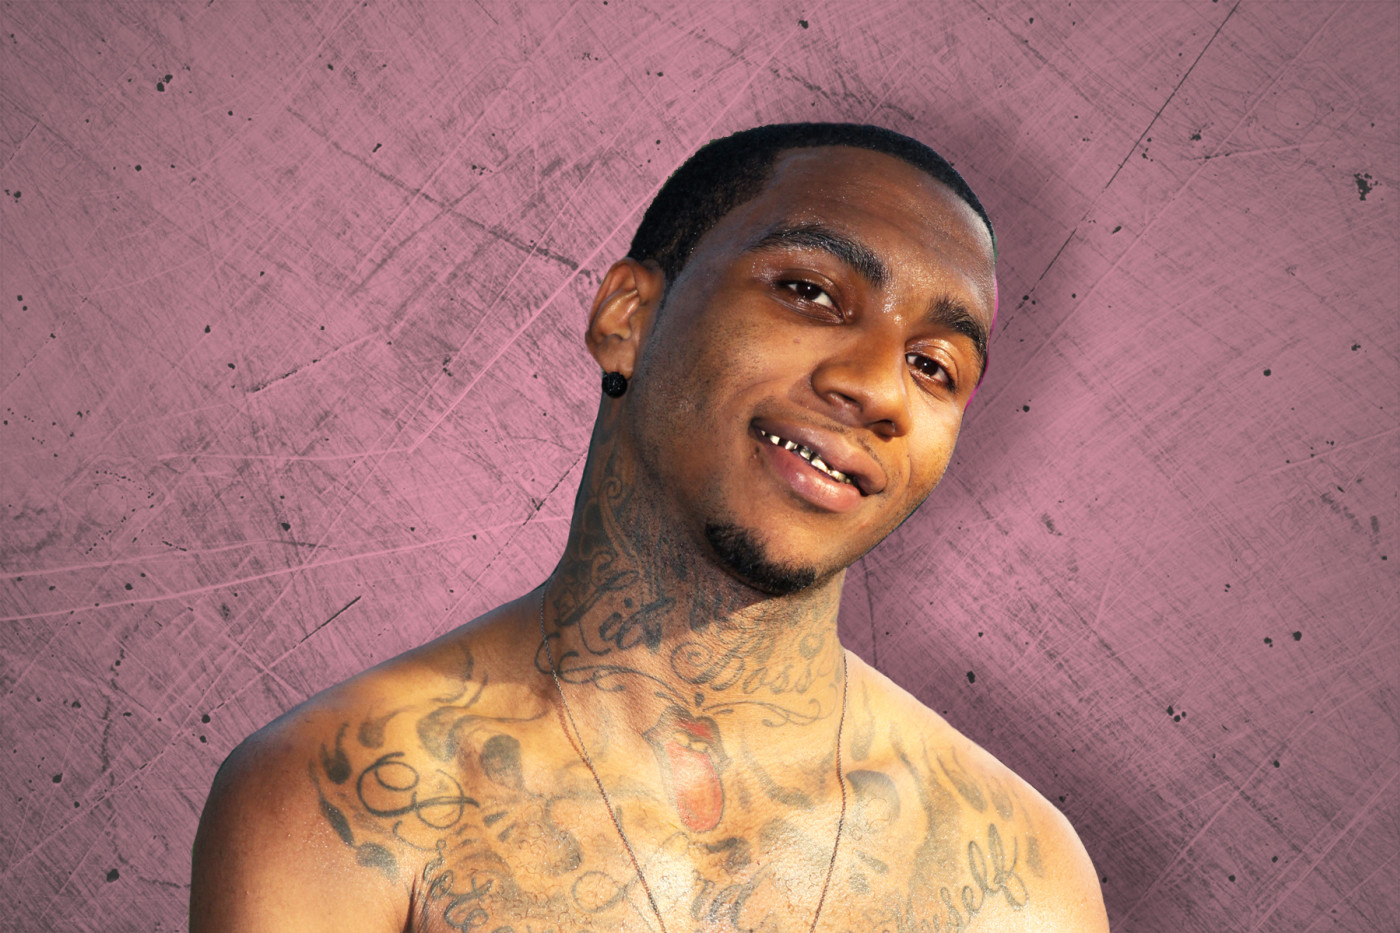 Lil b pictures